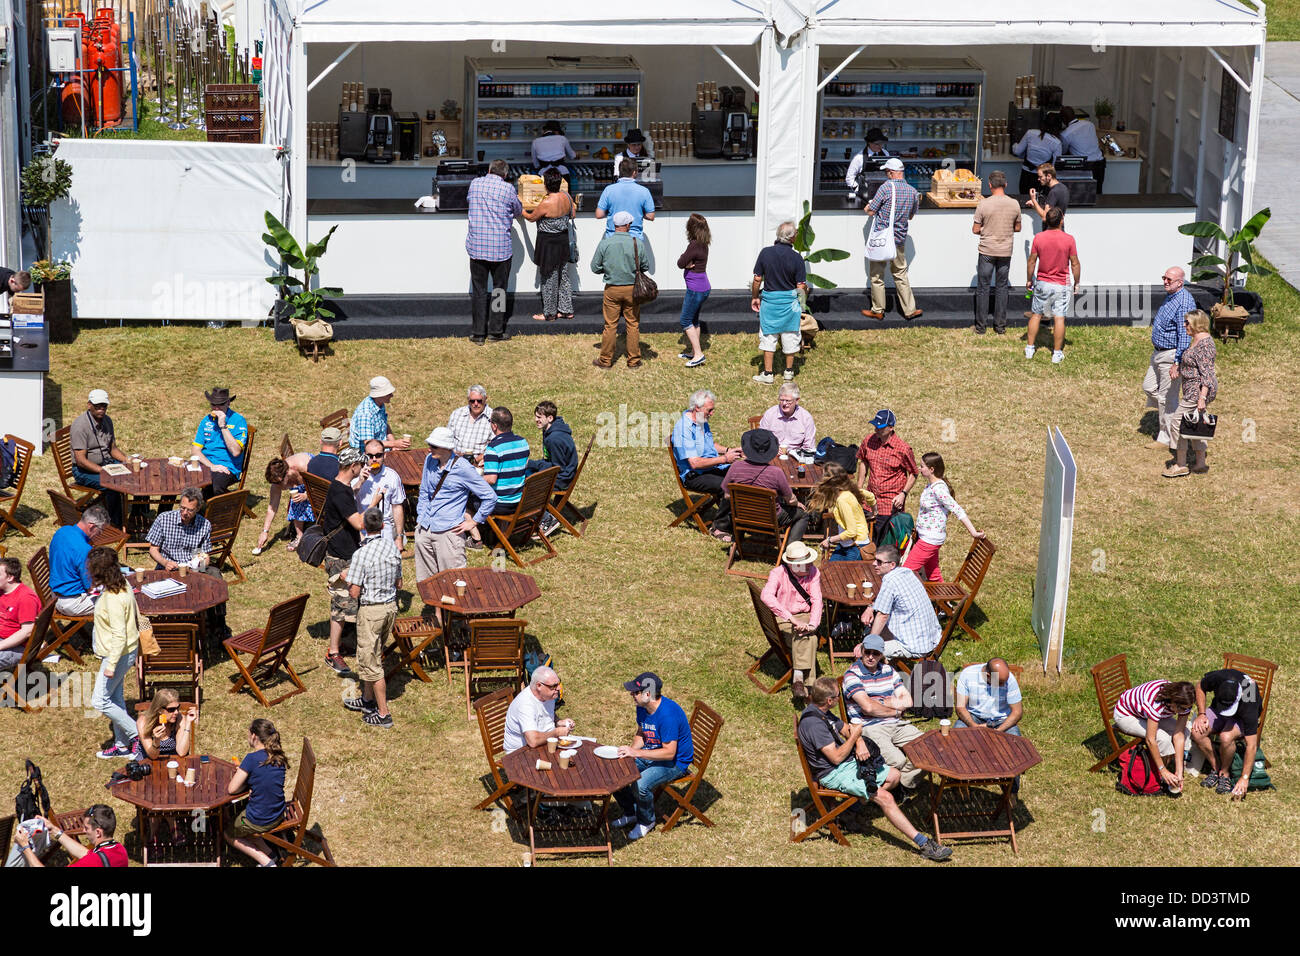 Outdoor refreshment area at the 2013 Goodwood Festival of Speed, Sussex, UK Stock Photo